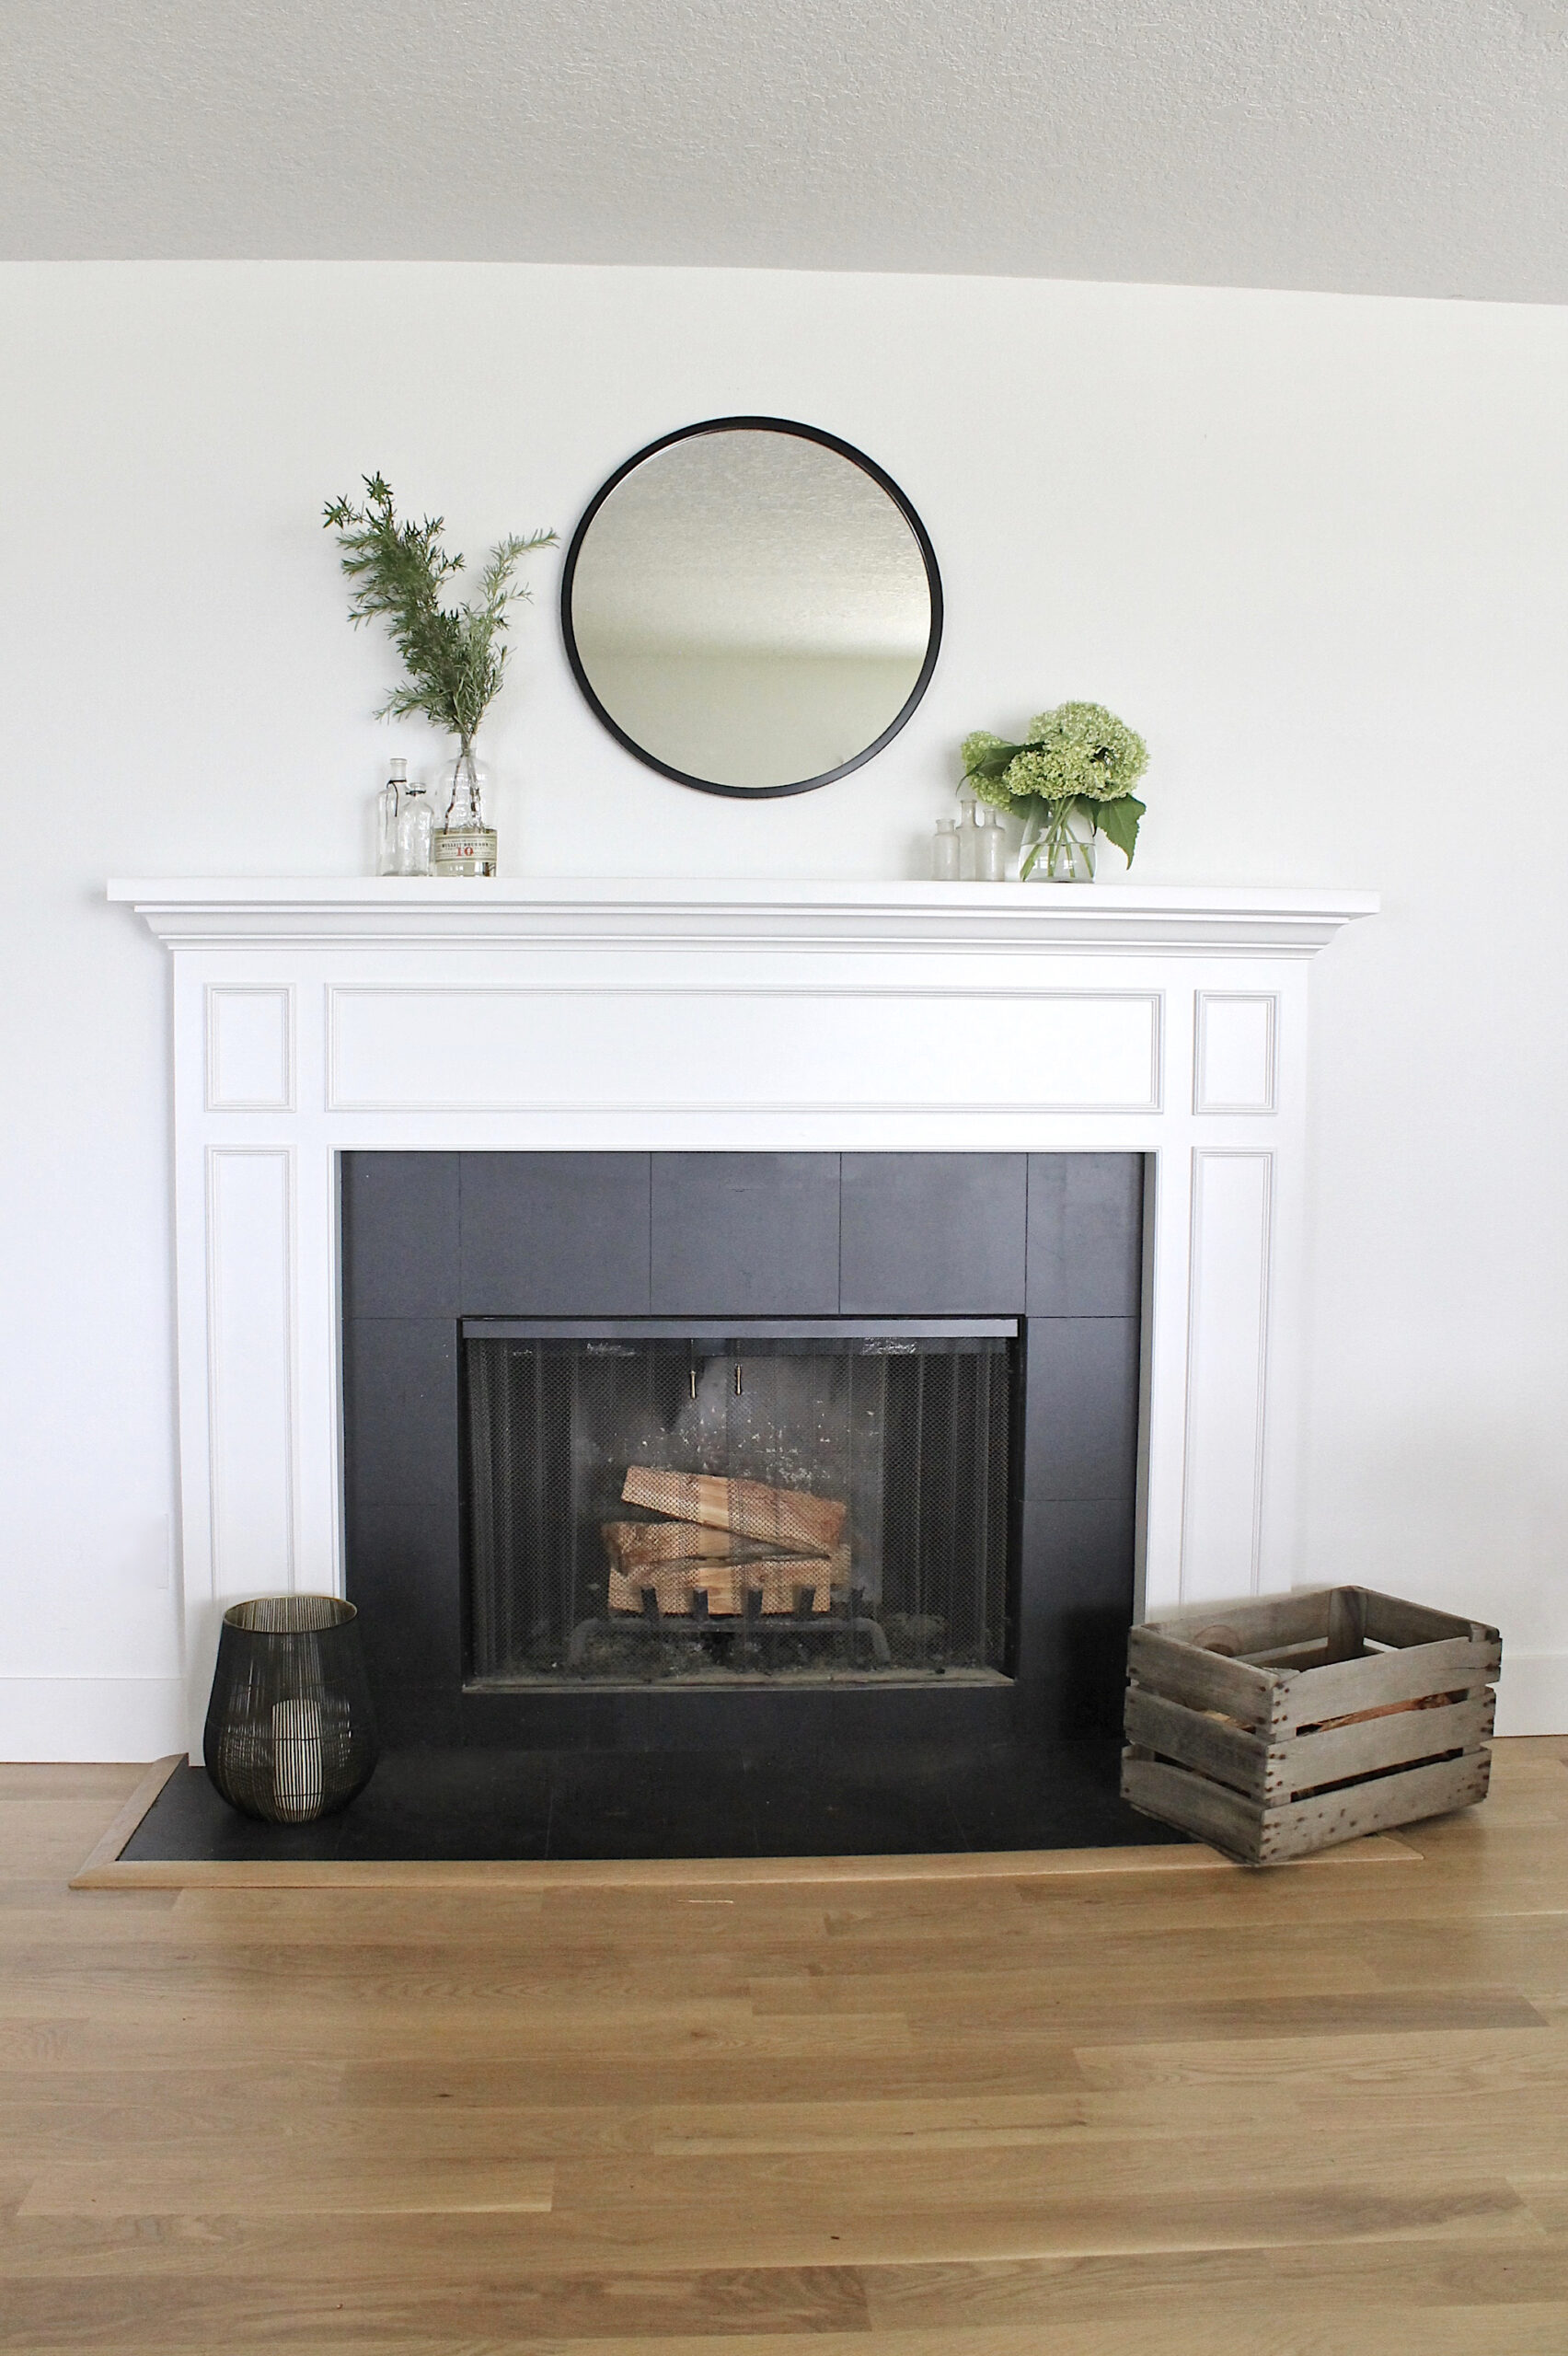 How To Paint A Ceramic Tile Fireplace, Paint Tile Around Fireplace